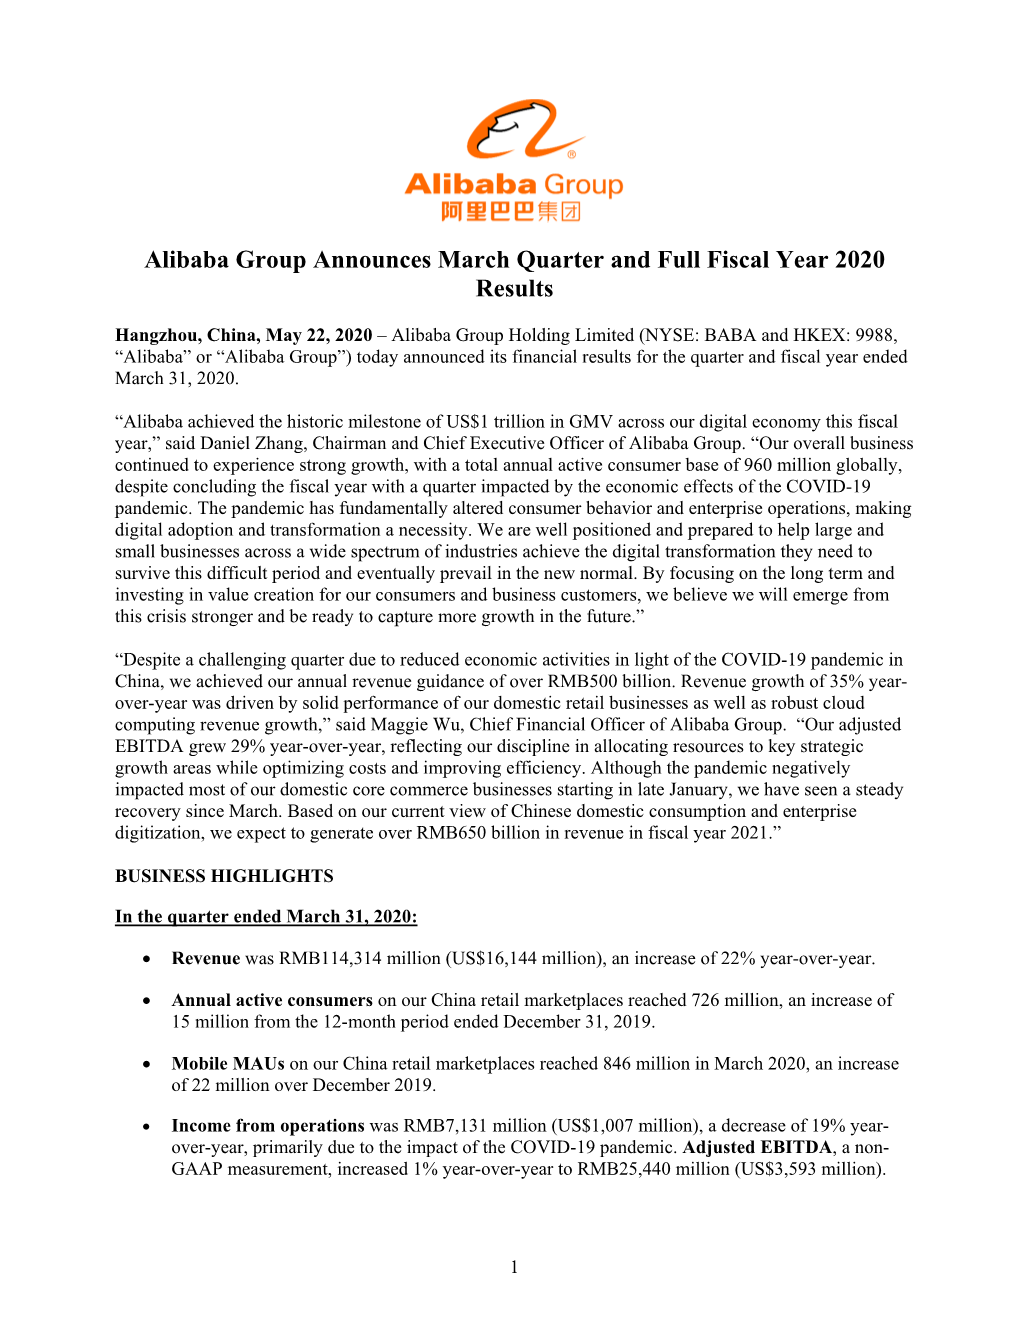 Alibaba Group Announces March Quarter and Full Fiscal Year 2020 Results